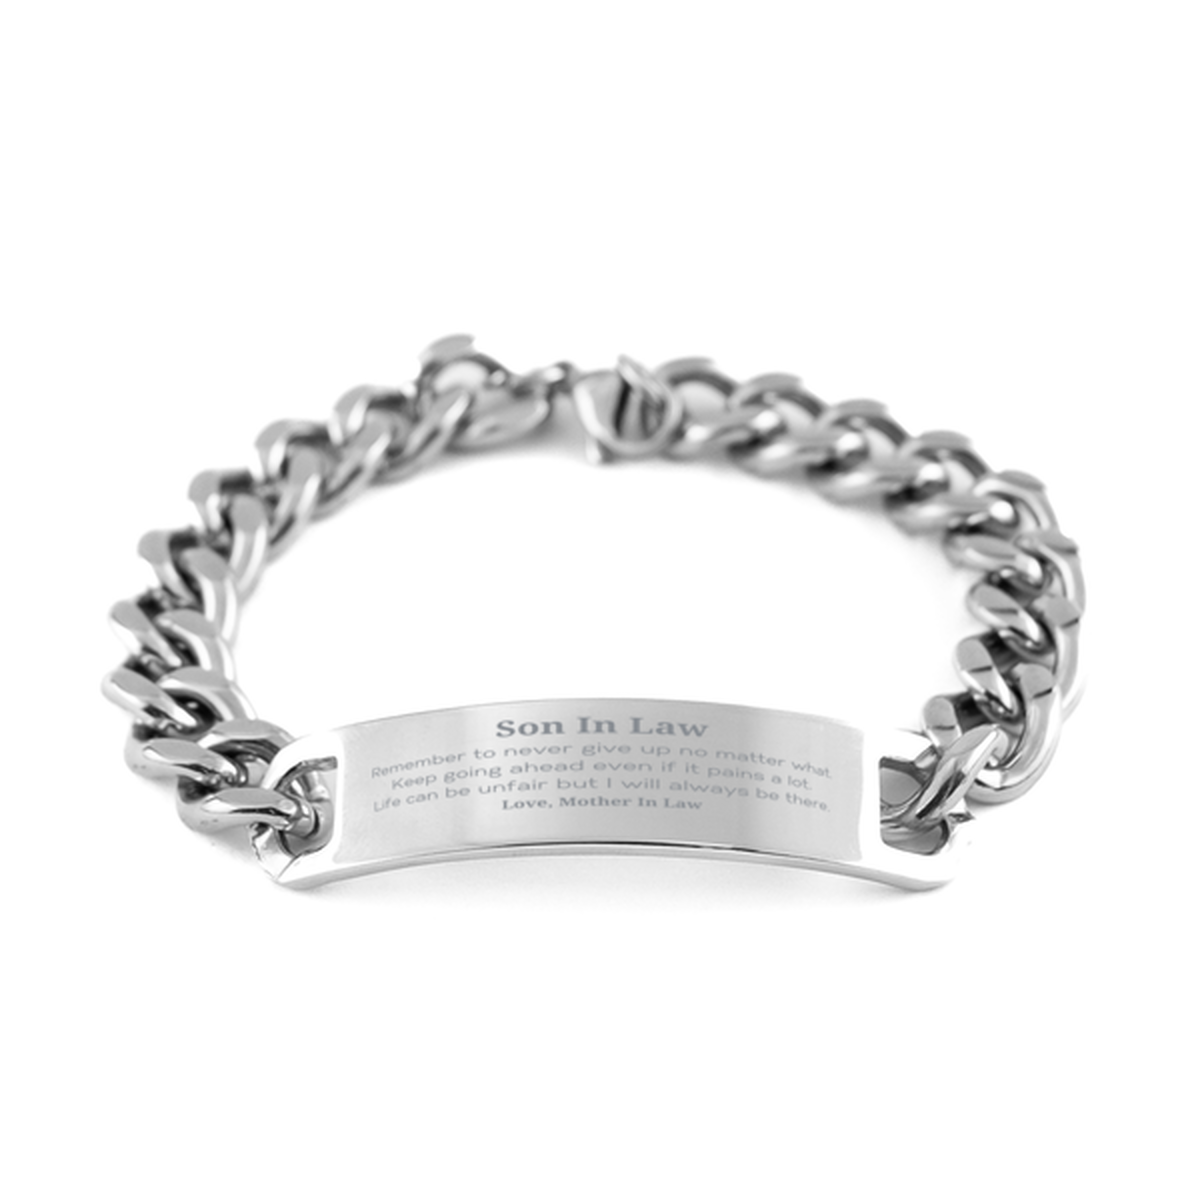 Son In Law Motivational Gifts from Mother In Law, Remember to never give up no matter what, Inspirational Birthday Cuban Chain Stainless Steel Bracelet for Son In Law